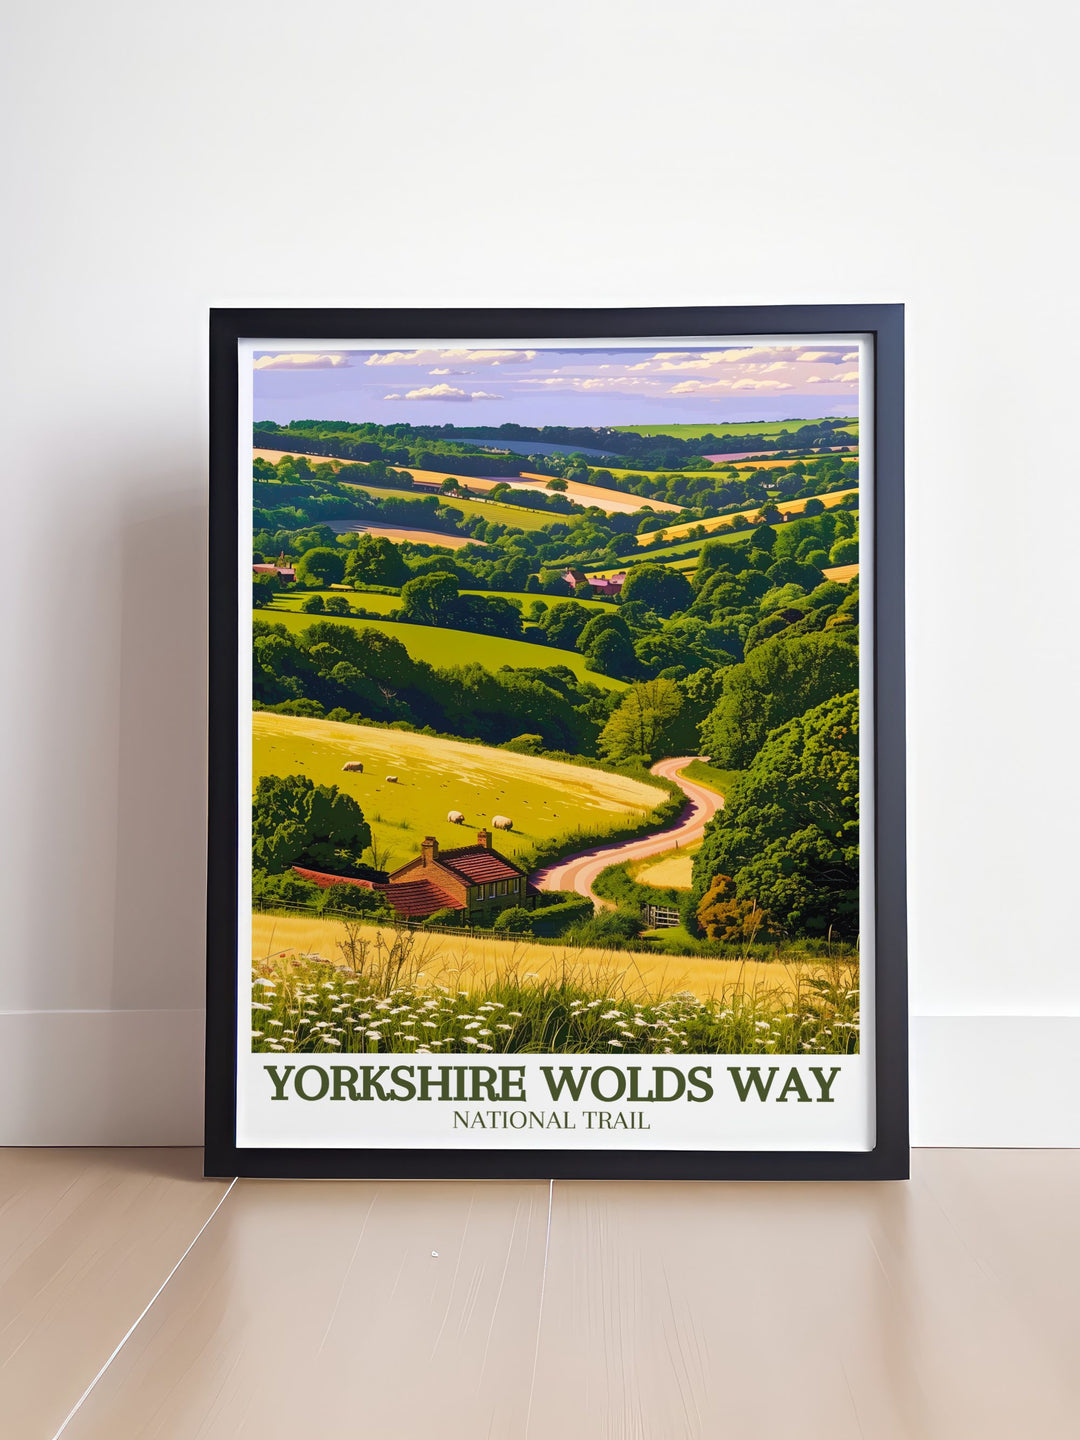 Modern wall decor featuring the picturesque landscapes of the Yorkshire Wolds Way. This print highlights the trails rolling hills, vibrant wildflower meadows, and tranquil paths, perfect for adding a contemporary touch of natural beauty to your home decor.